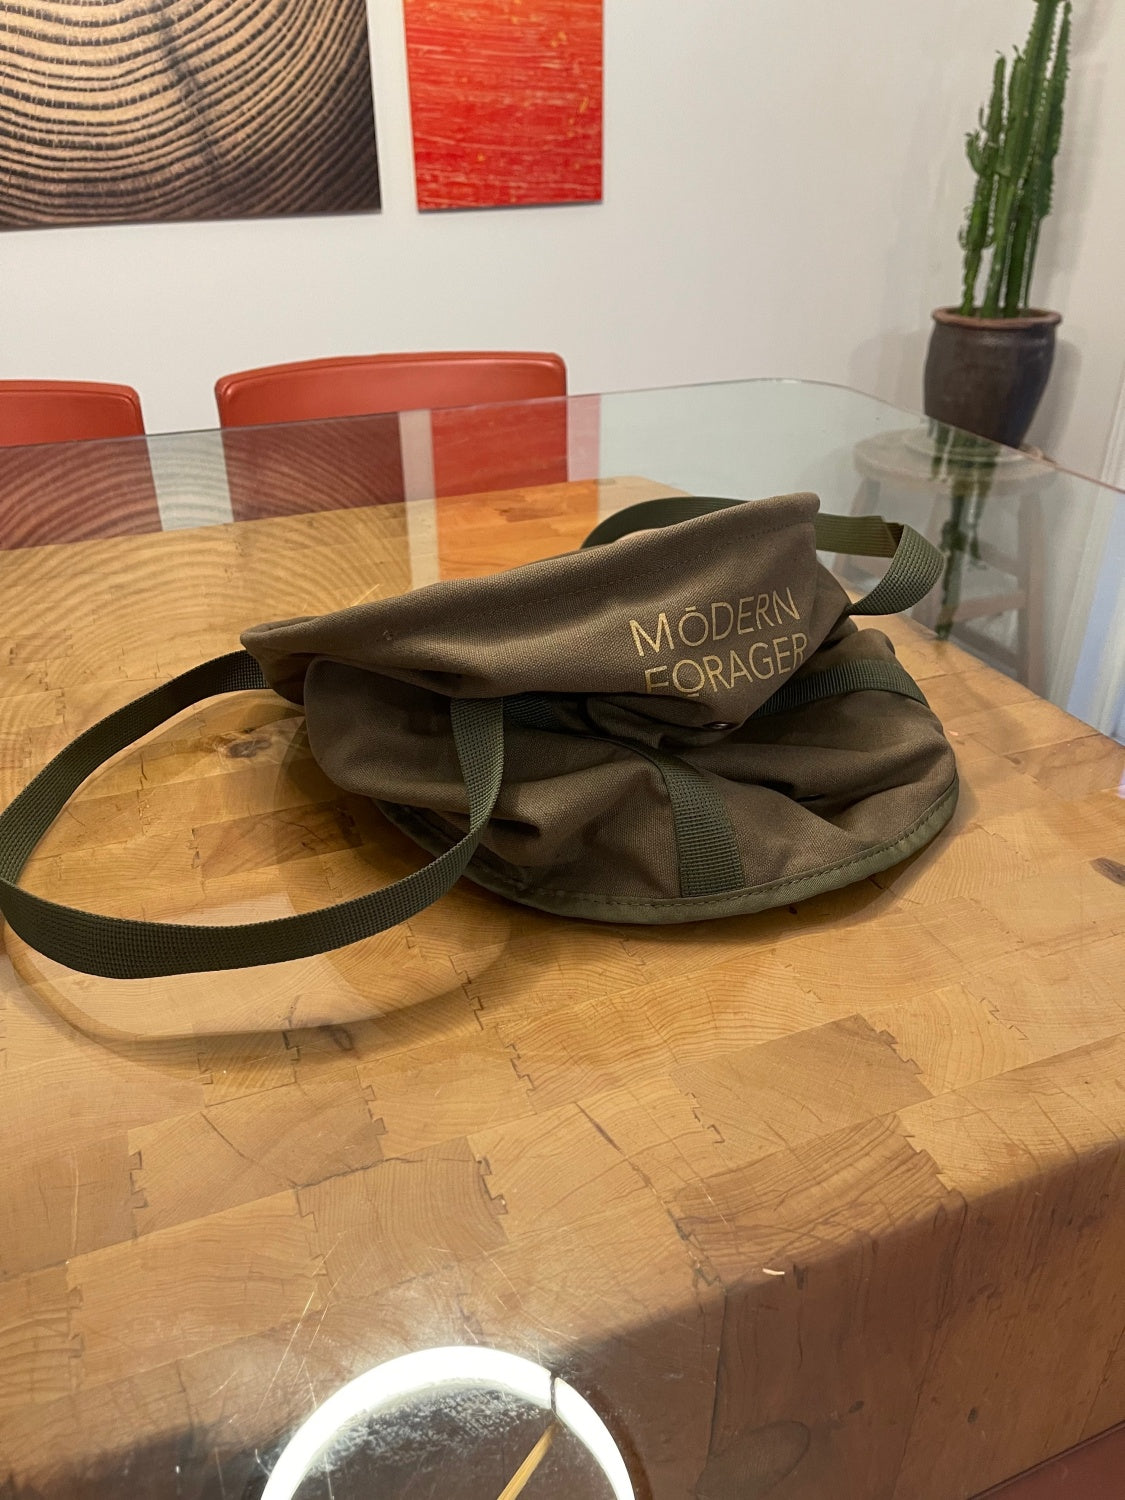 Canvas Forager's Bucket Bag